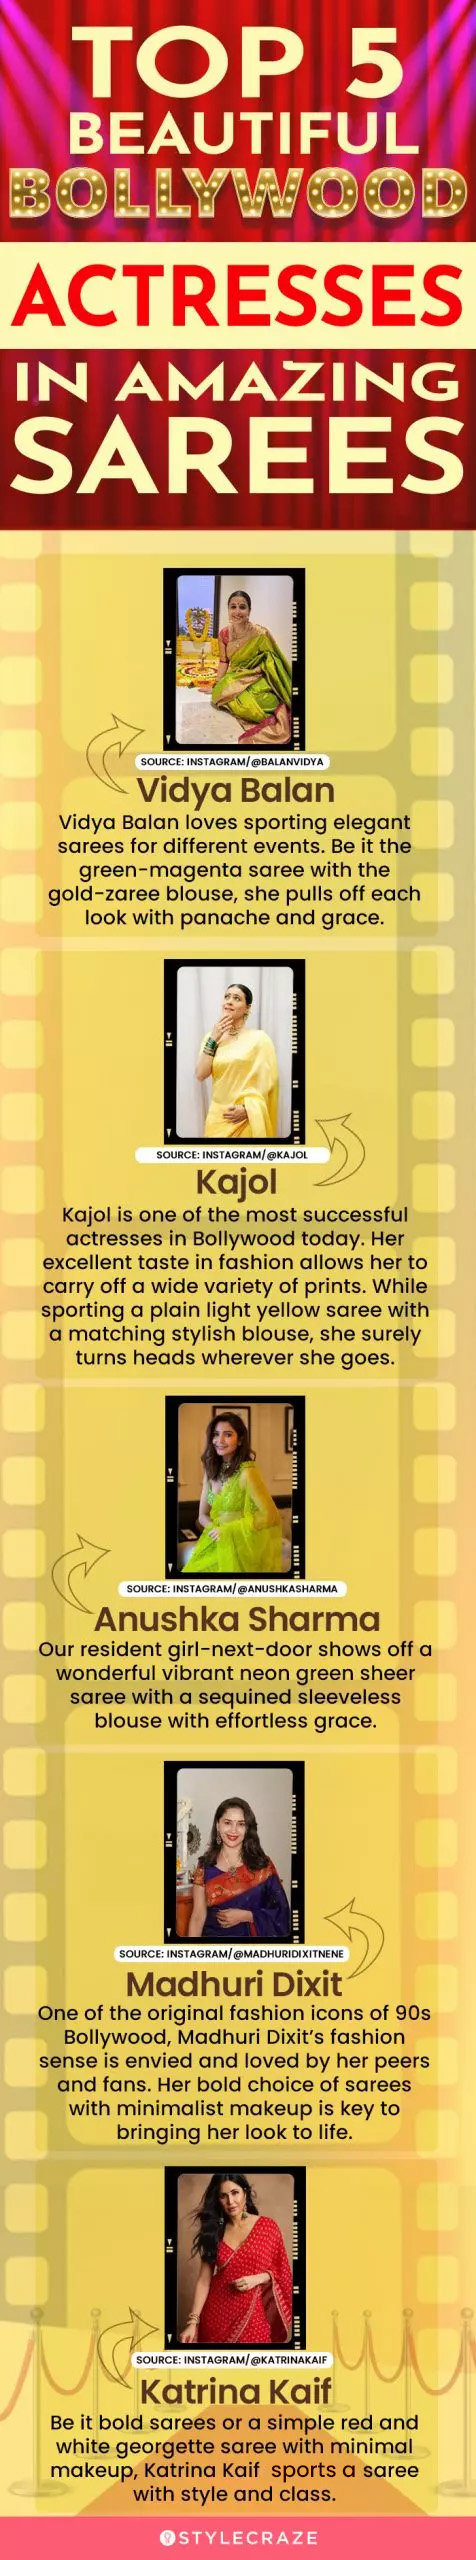 top 5 beautiful bollywood actresses in amazing sarees (infographic)